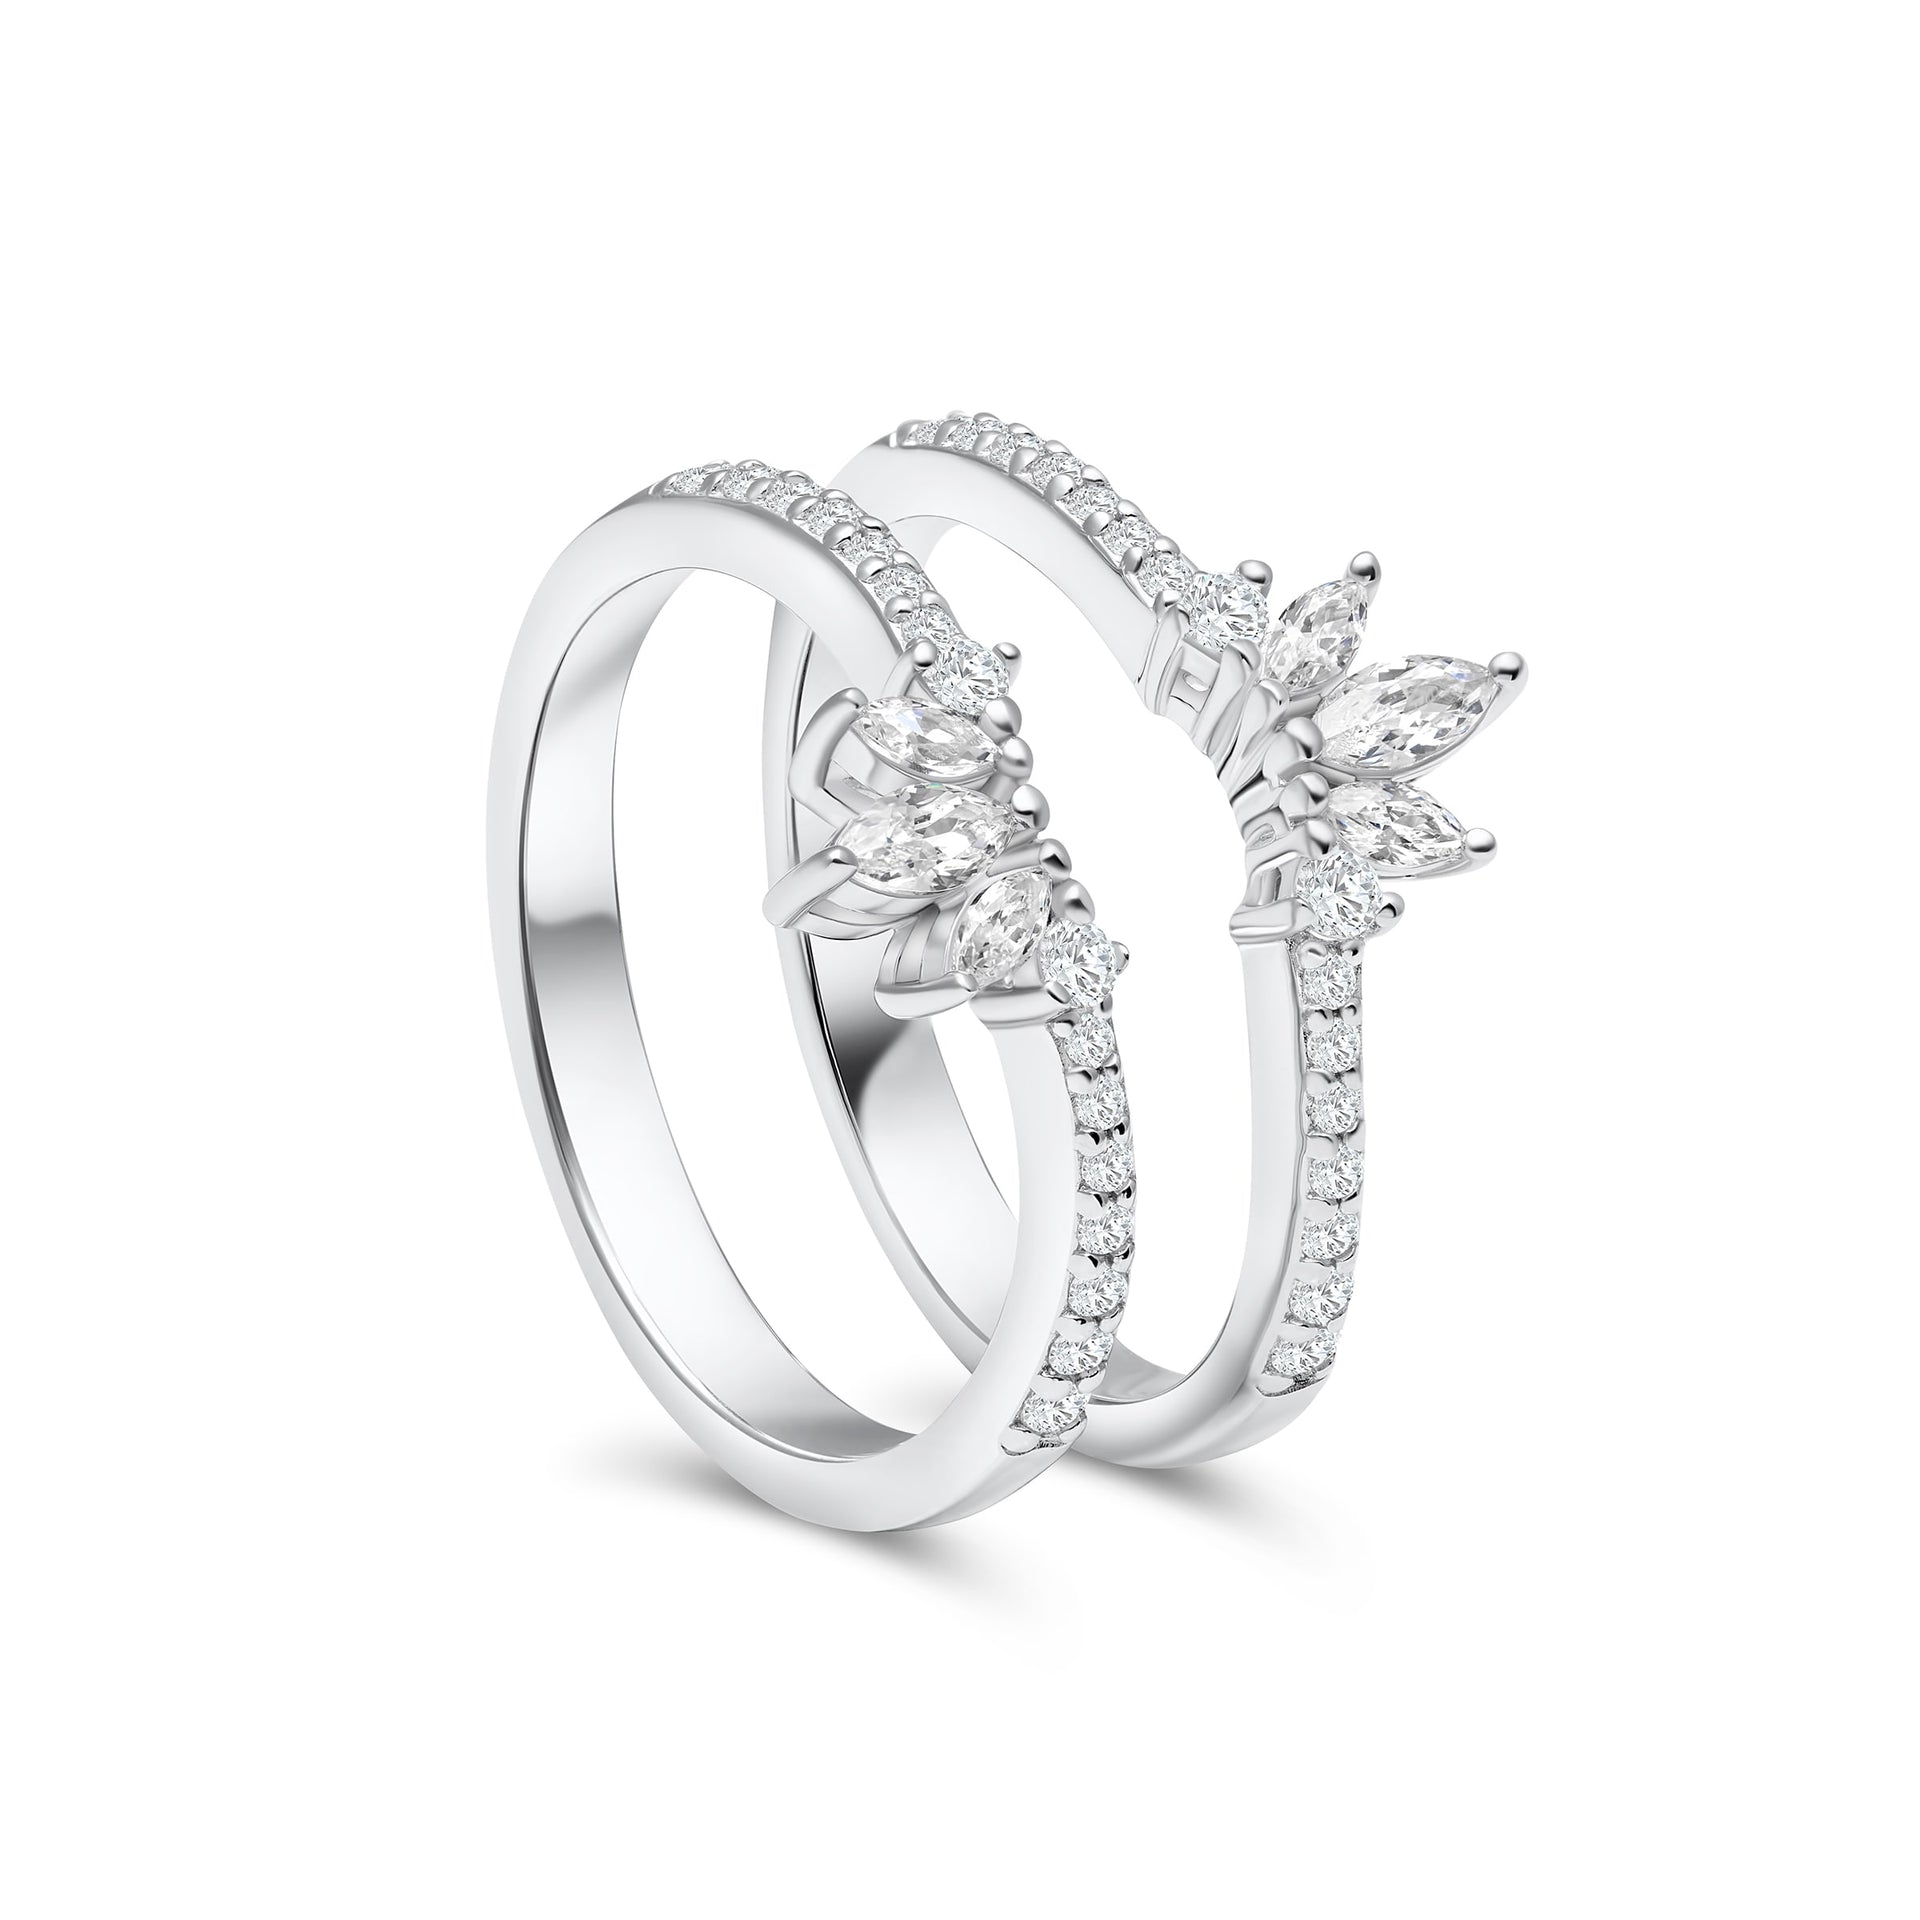  The exquisite duo v-shaped bands features 3 center marquise stones with round stones glistening down the sides.